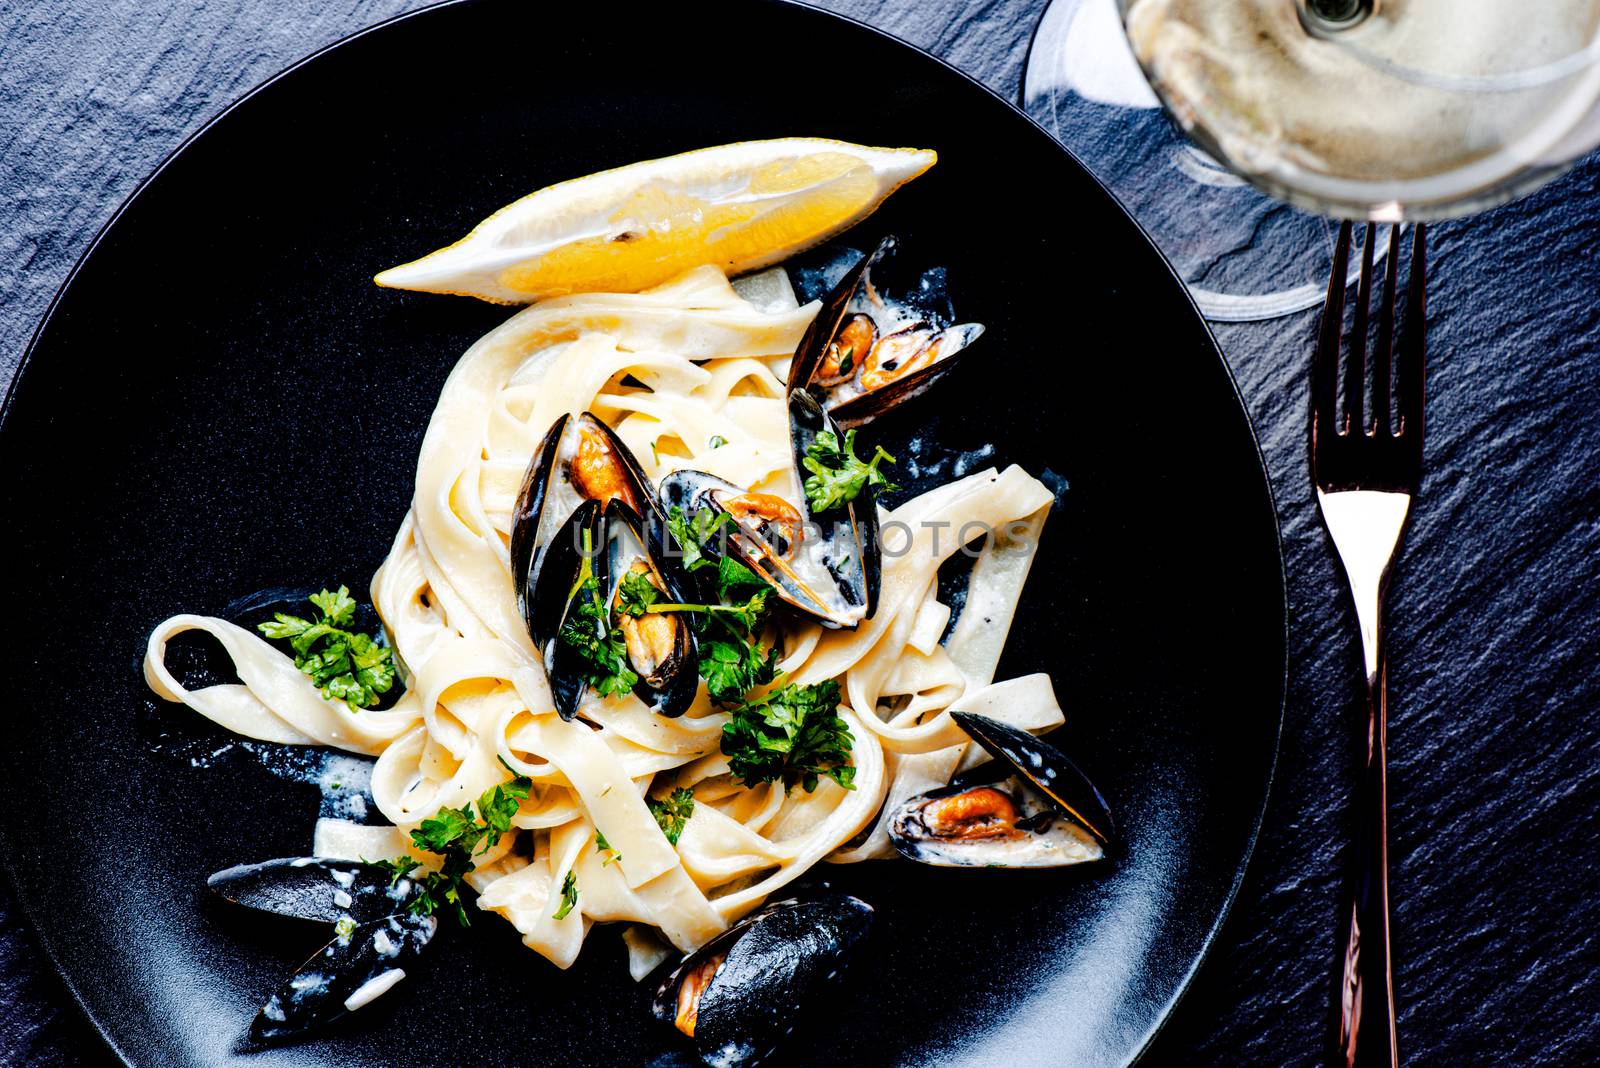 Blue mussels and pasta in black plate by Nanisimova